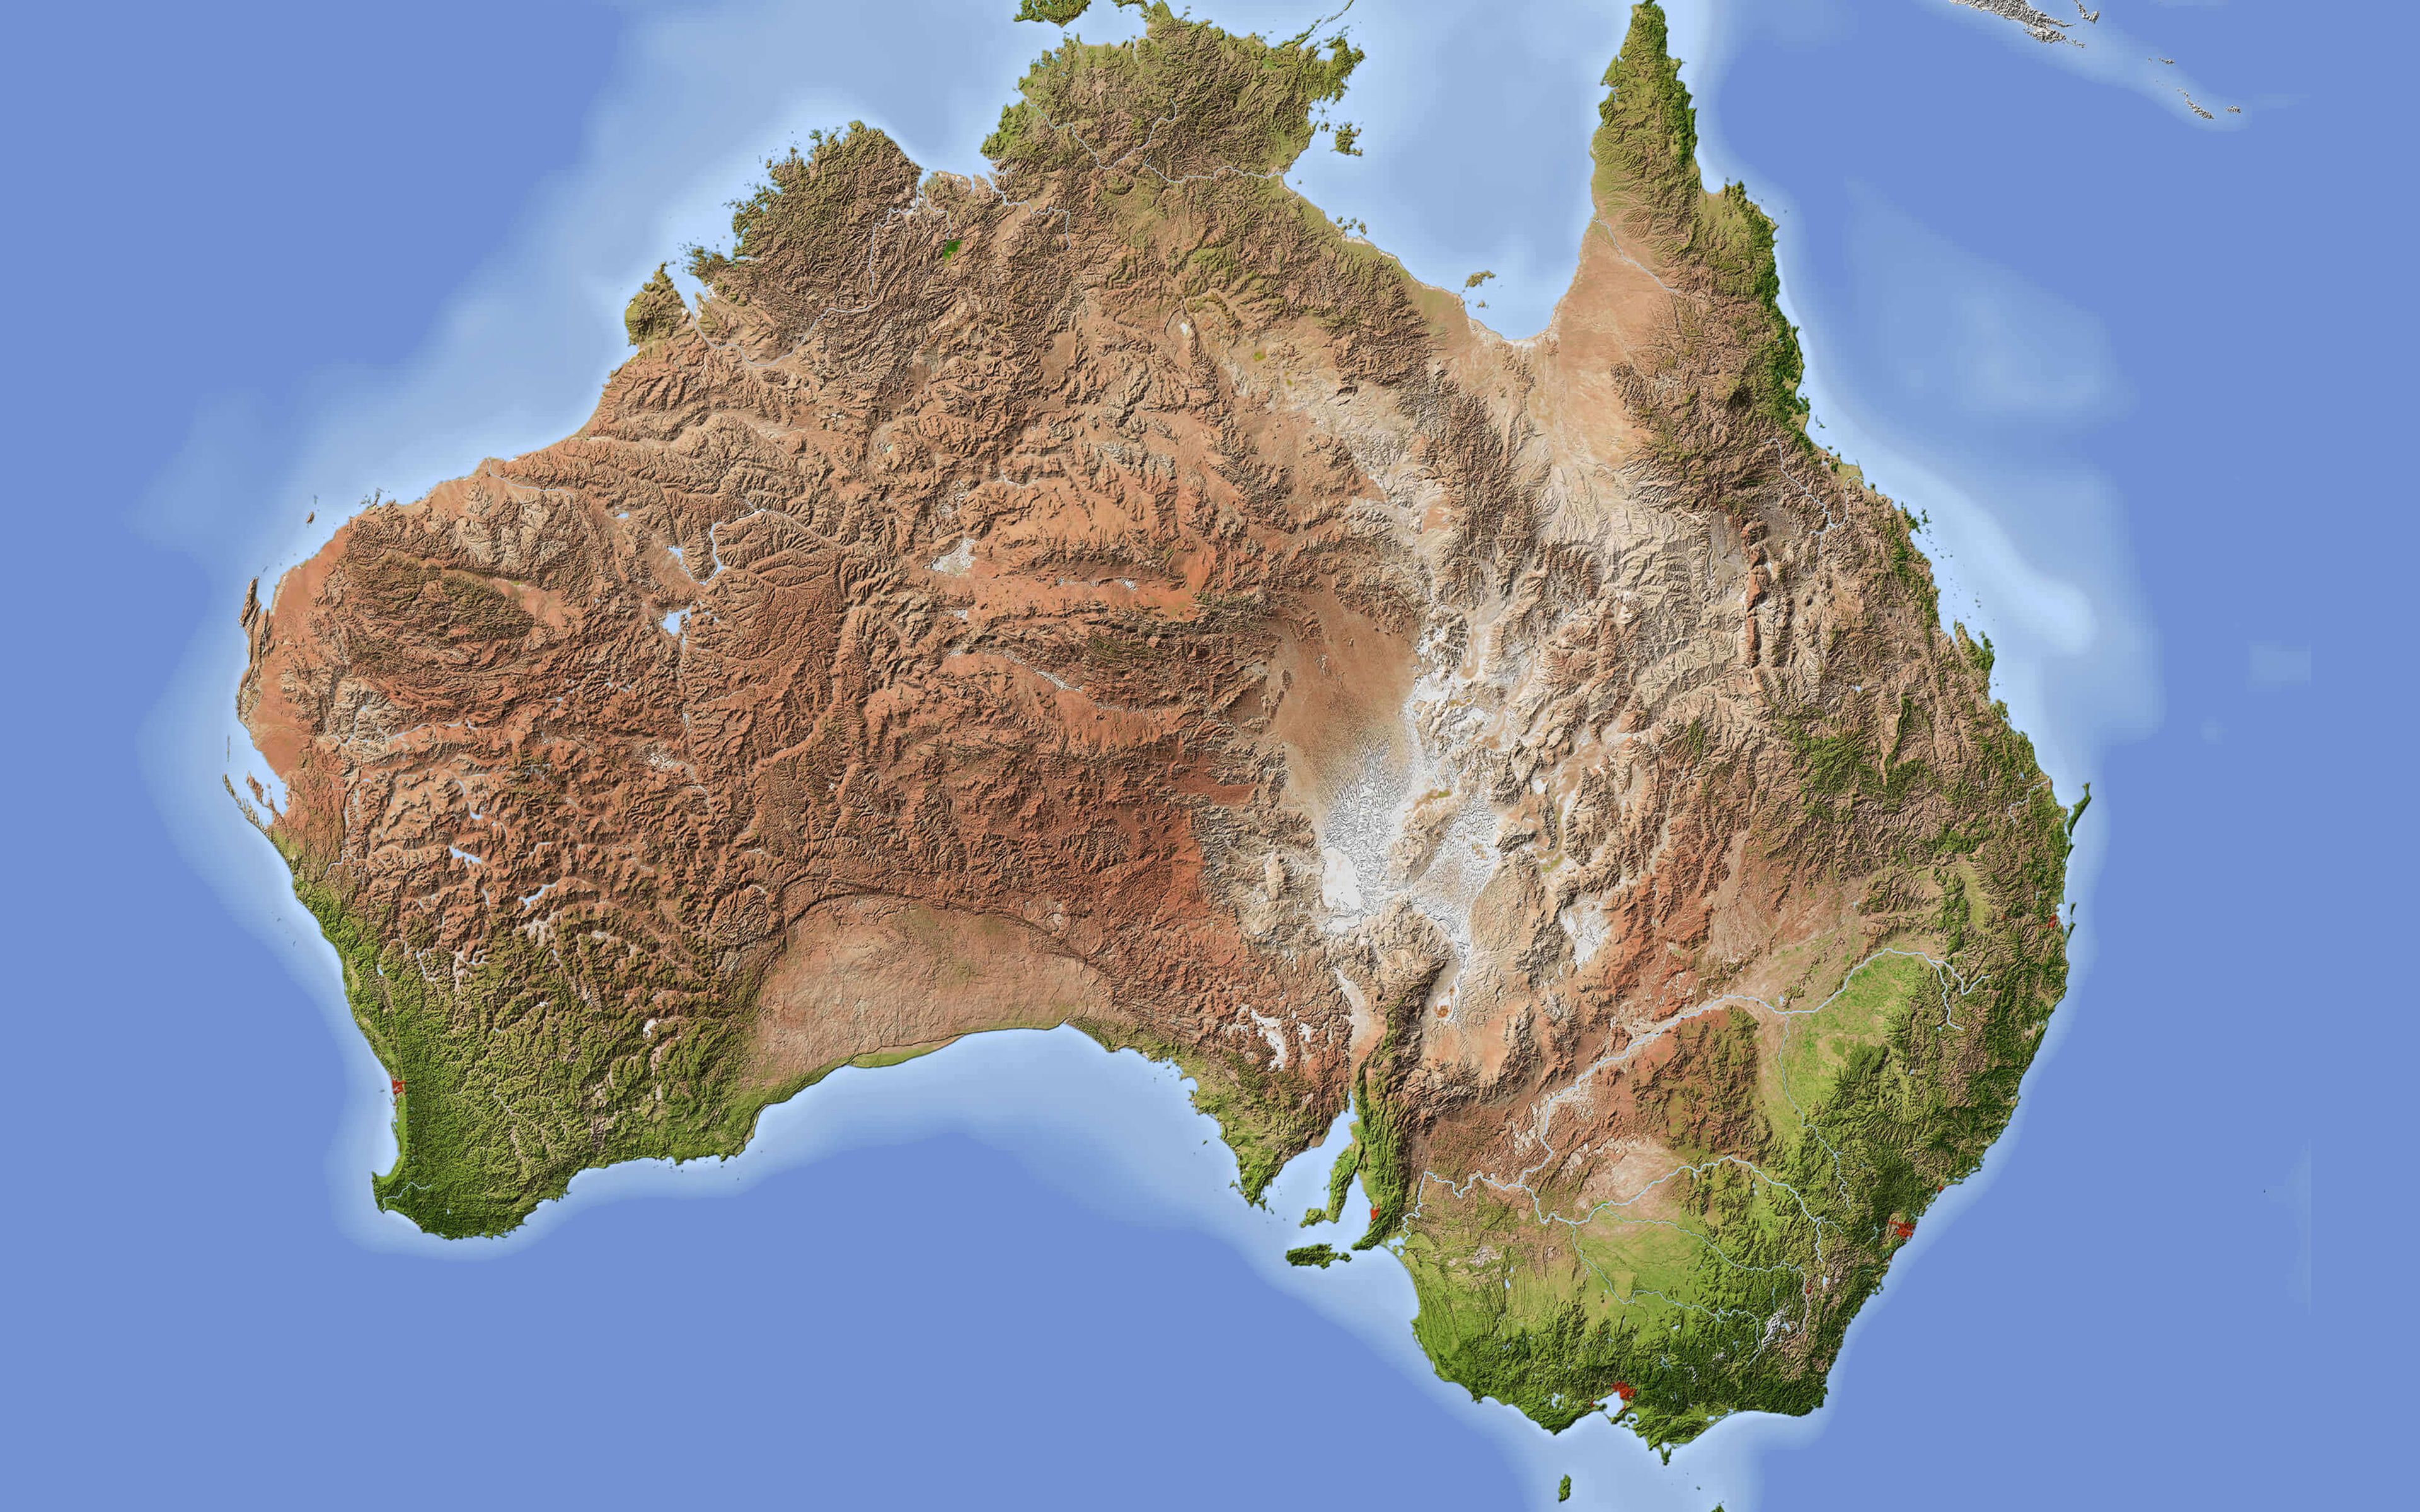 Australia Map Wallpapers Top Free Australia Map Backgrounds | Images ...